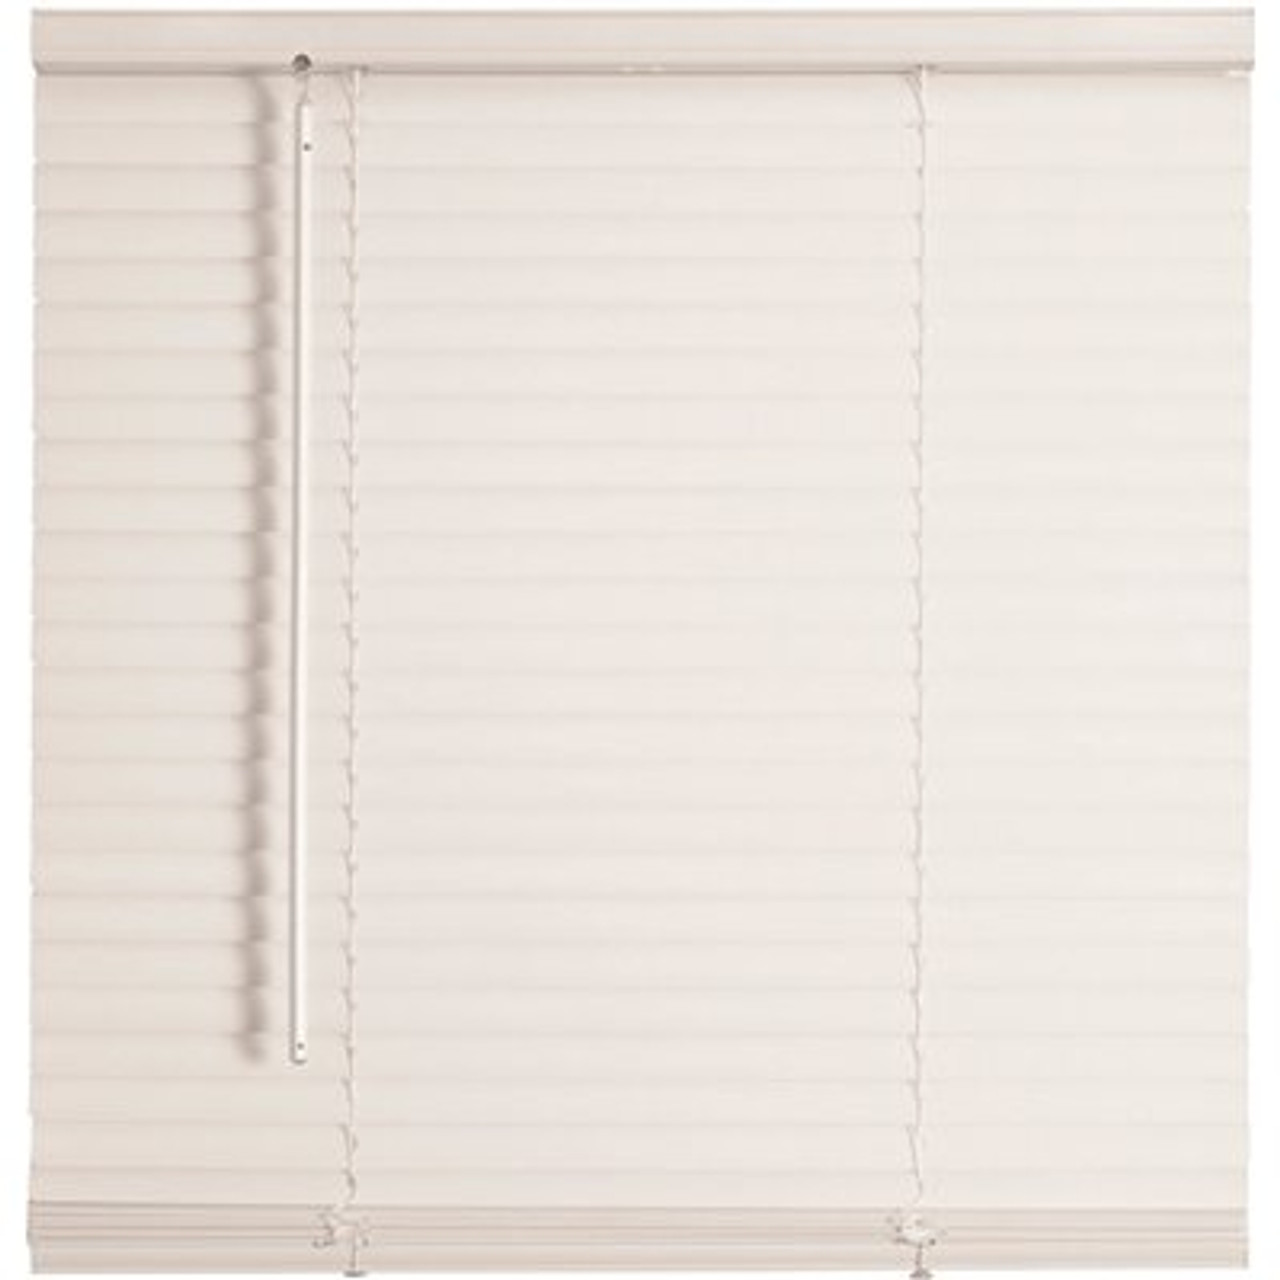 Champion Trutouch White Cordless Light Filtering Vinyl Mini Blinds With 1 In. Slats 72 In. W X 64 In. L